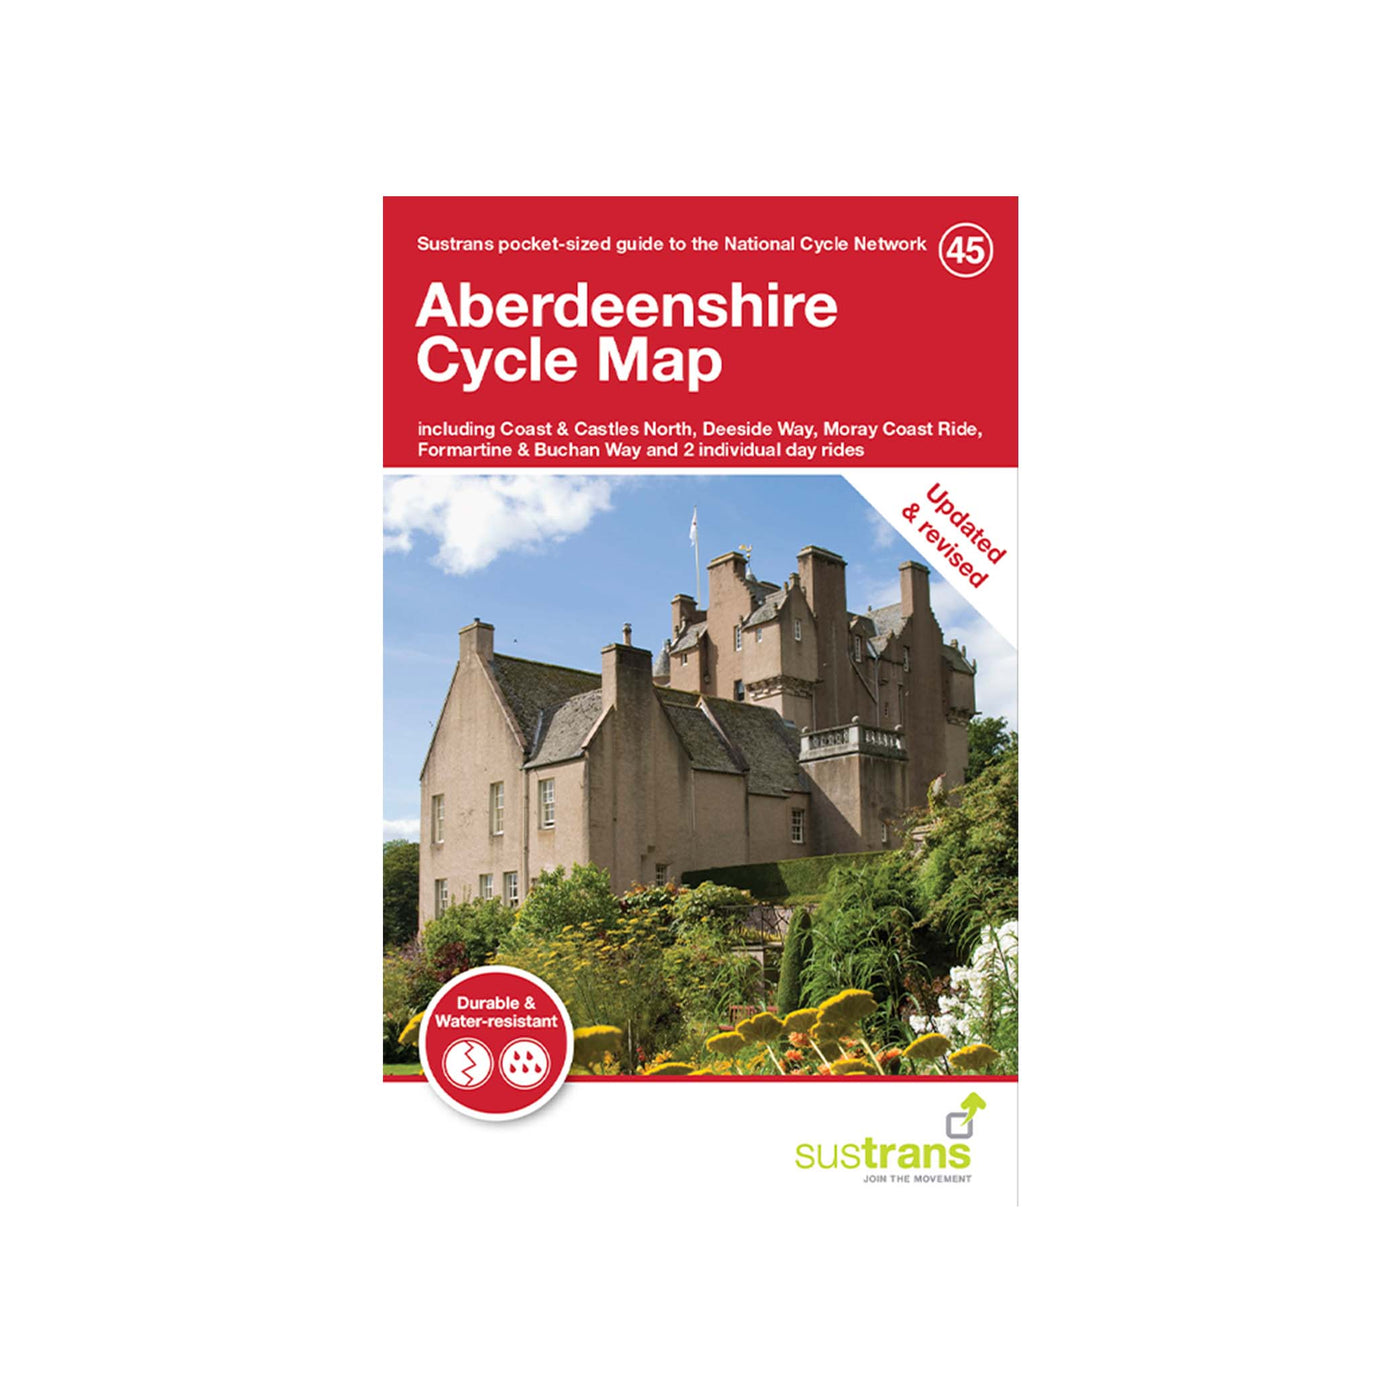 Sustrans Aberdeenshire Cycle Map (45)